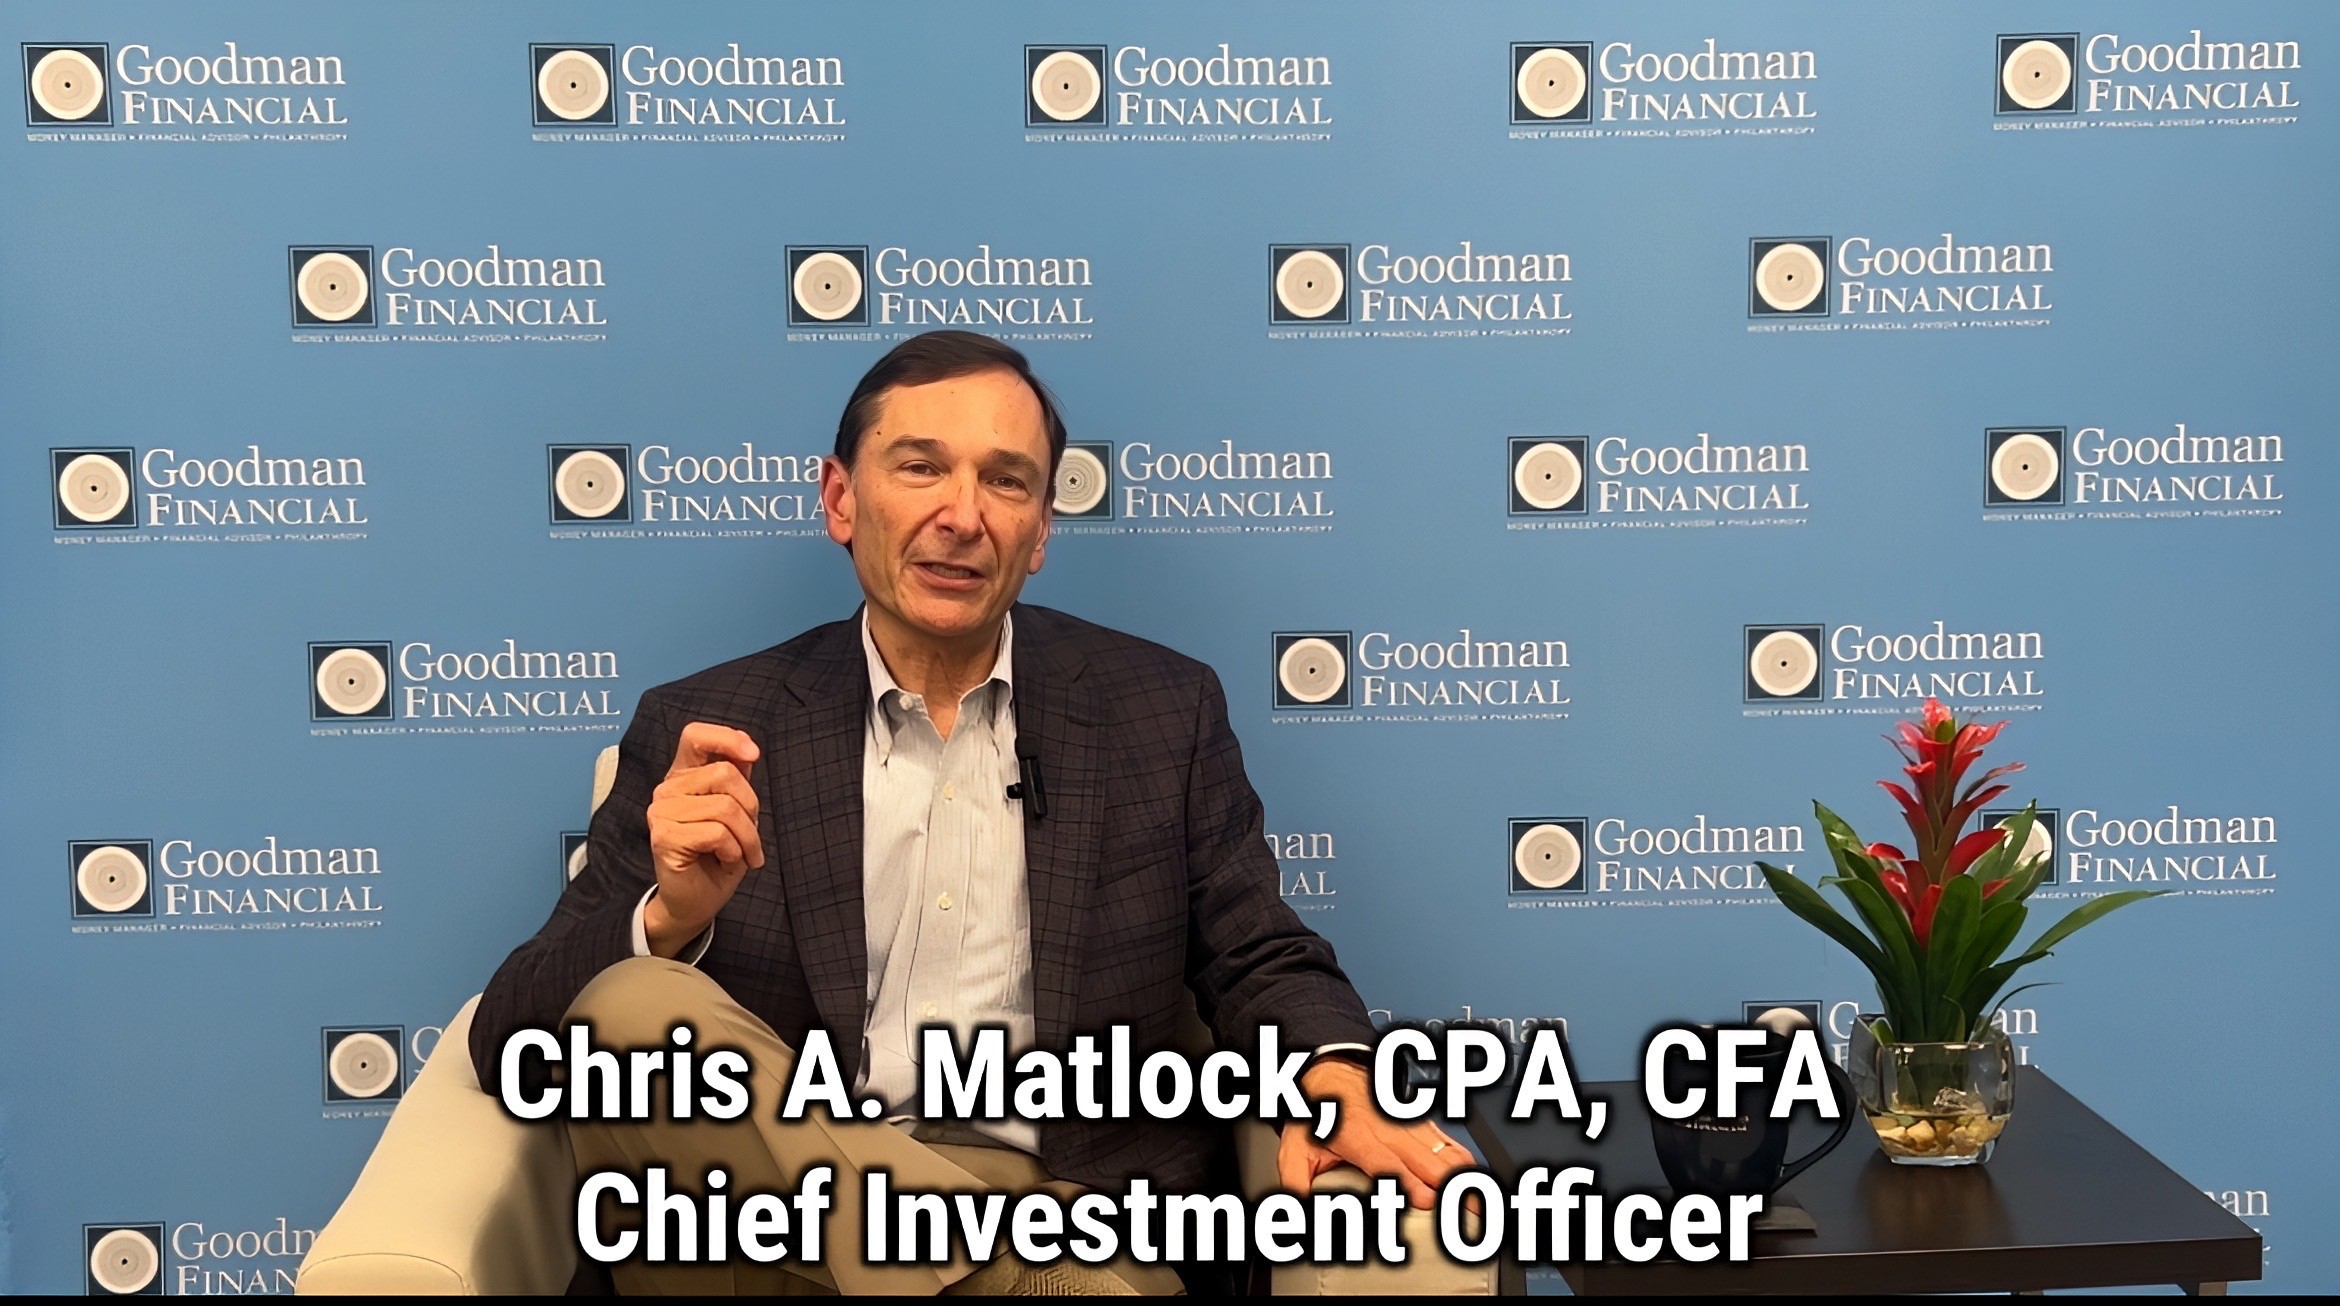 Chris Matlock, Chief Investment Officer